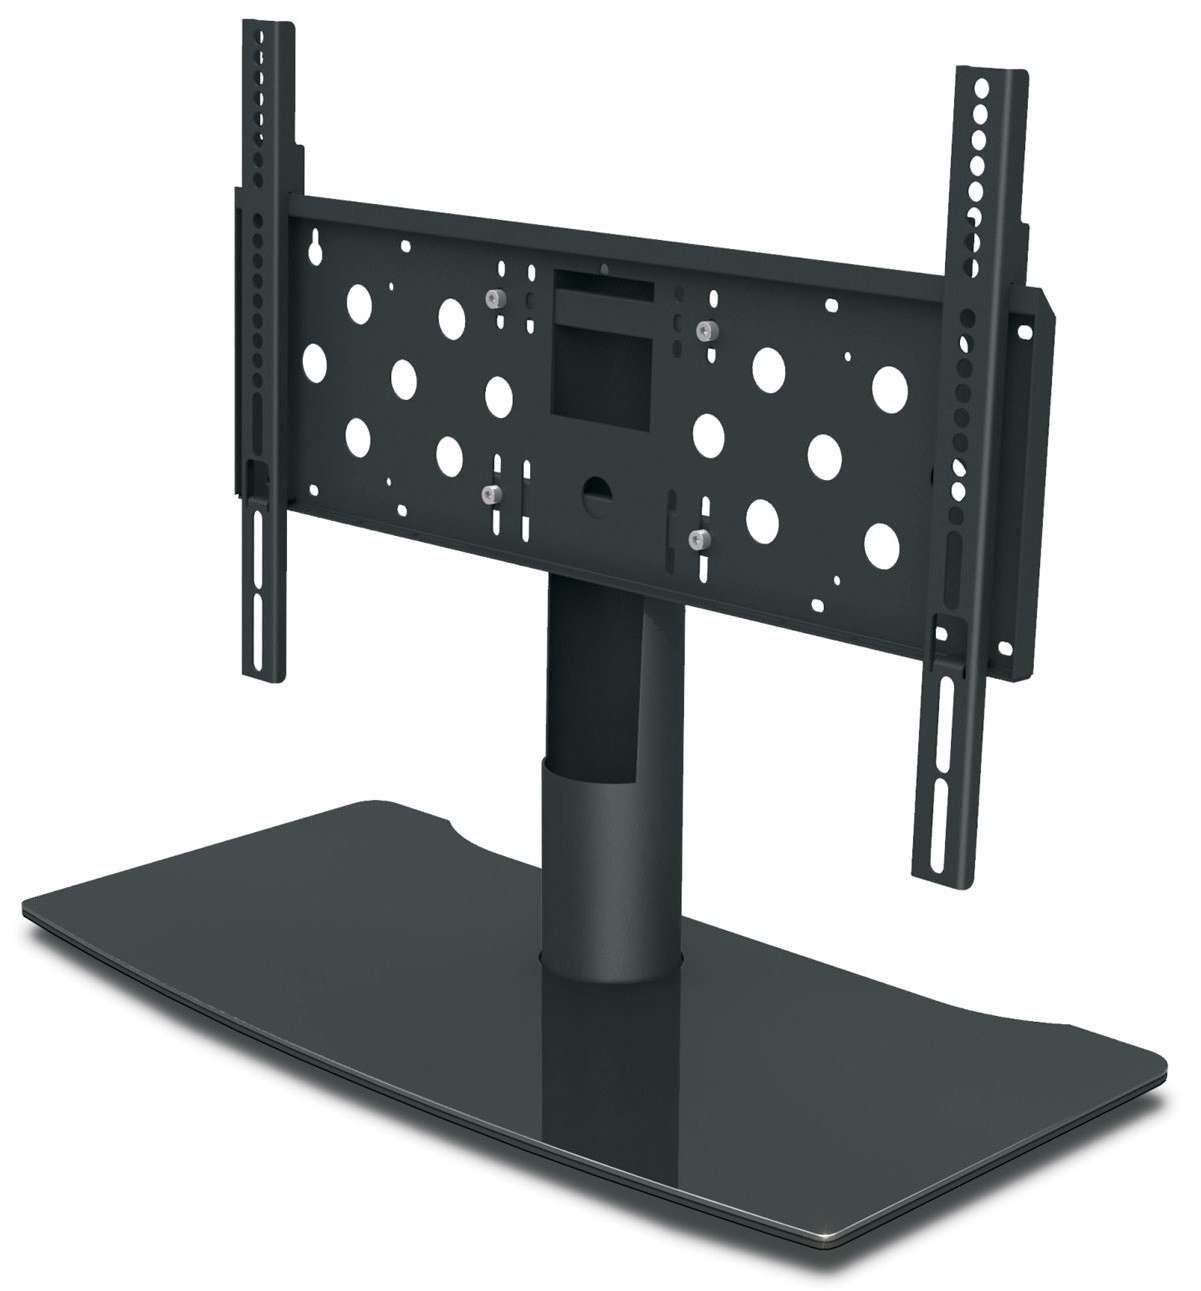 Mountech Mtd5 Large Universal Table Top Stand Pertaining To Tabletop Tv Stands (View 2 of 15)